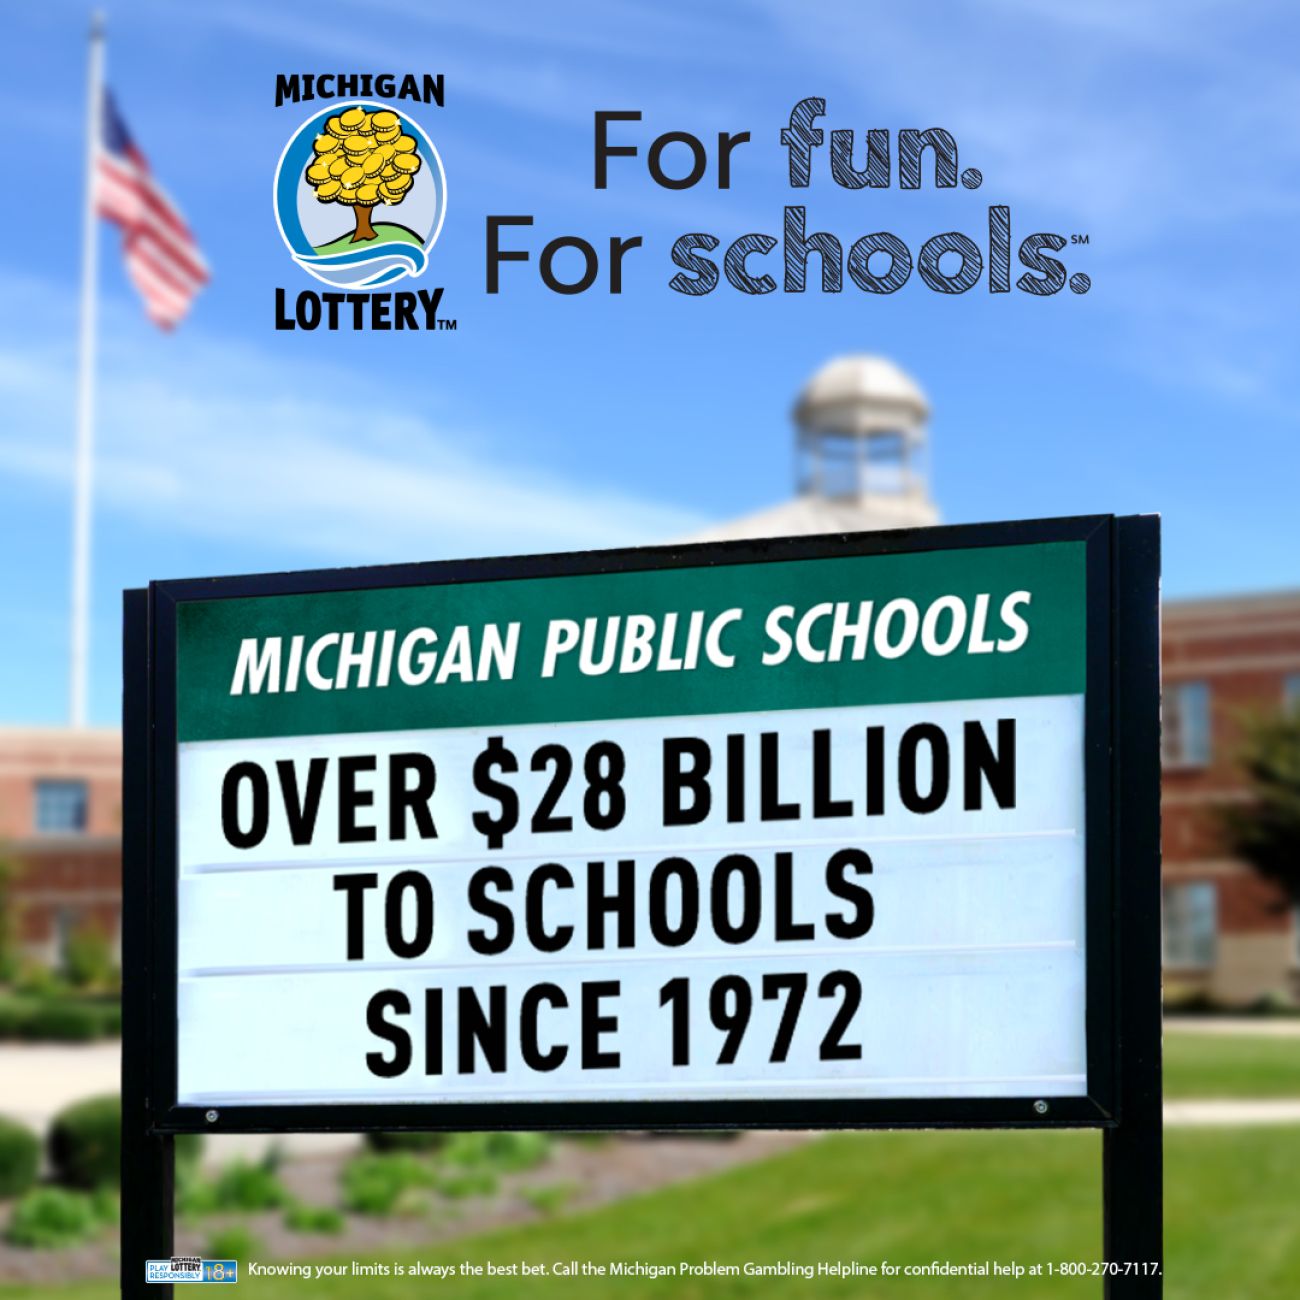 Ad for the Michigan Lottery, highlighting the money goes to schools